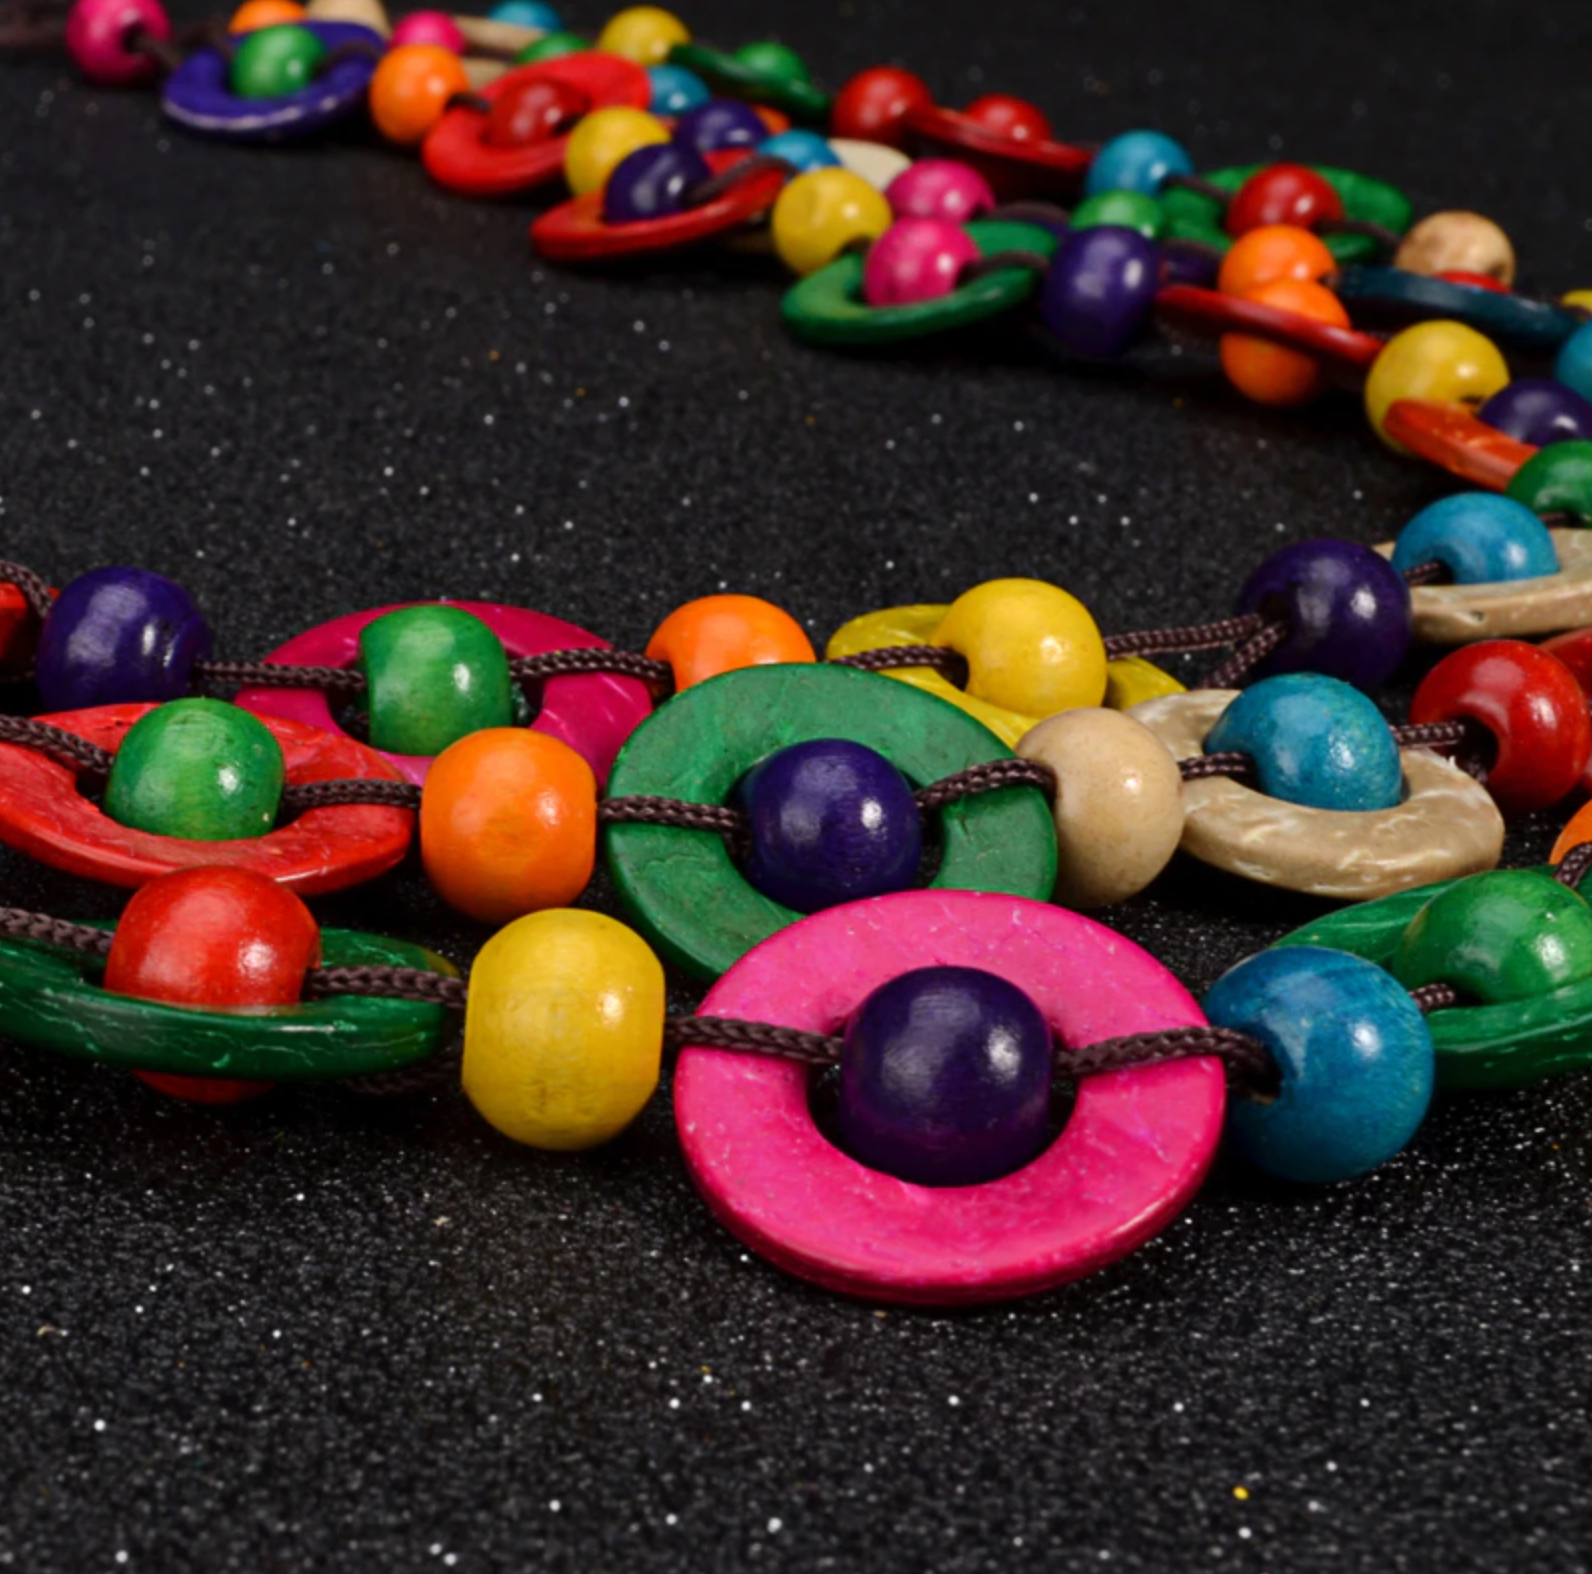 Colorful handmade wooden necklace inspired by Frida Kahlo and Mexican jewelry for Fridamaniacs and Fridalovers. Handmade. Girls and women birthday gift idea